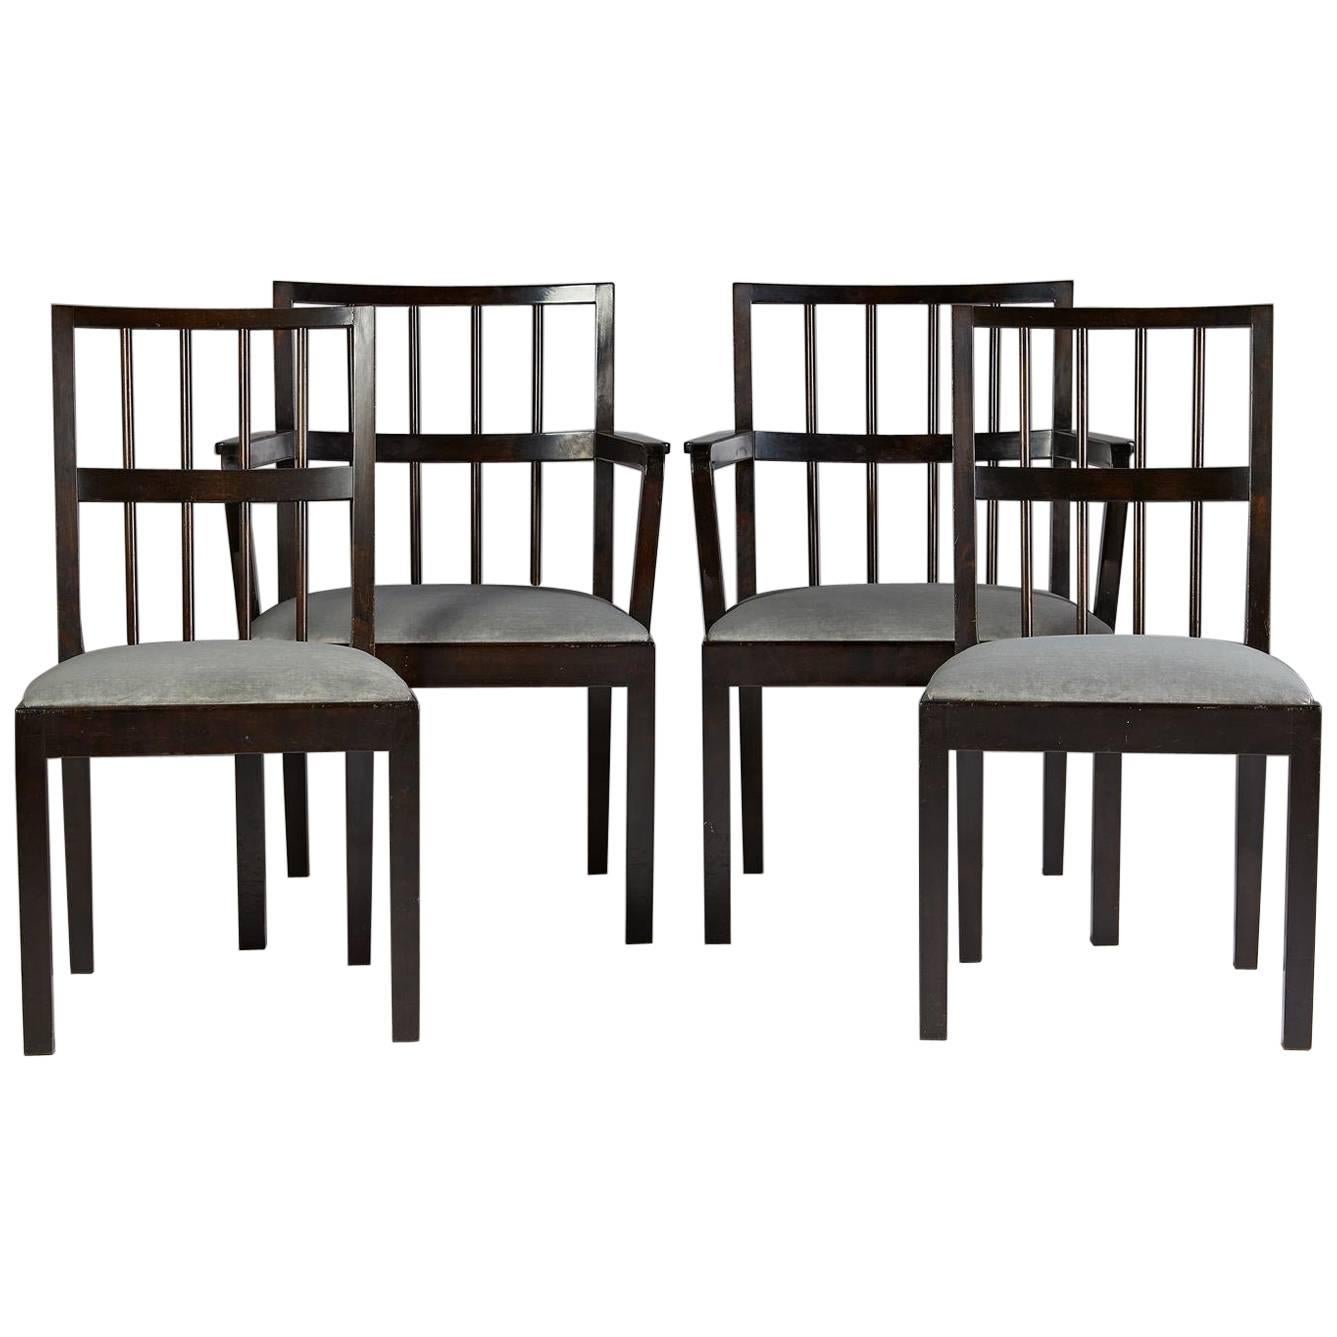 Set of Four Chairs, Designed by Axel Einar Hjorth for NK, Sweden, 1930s